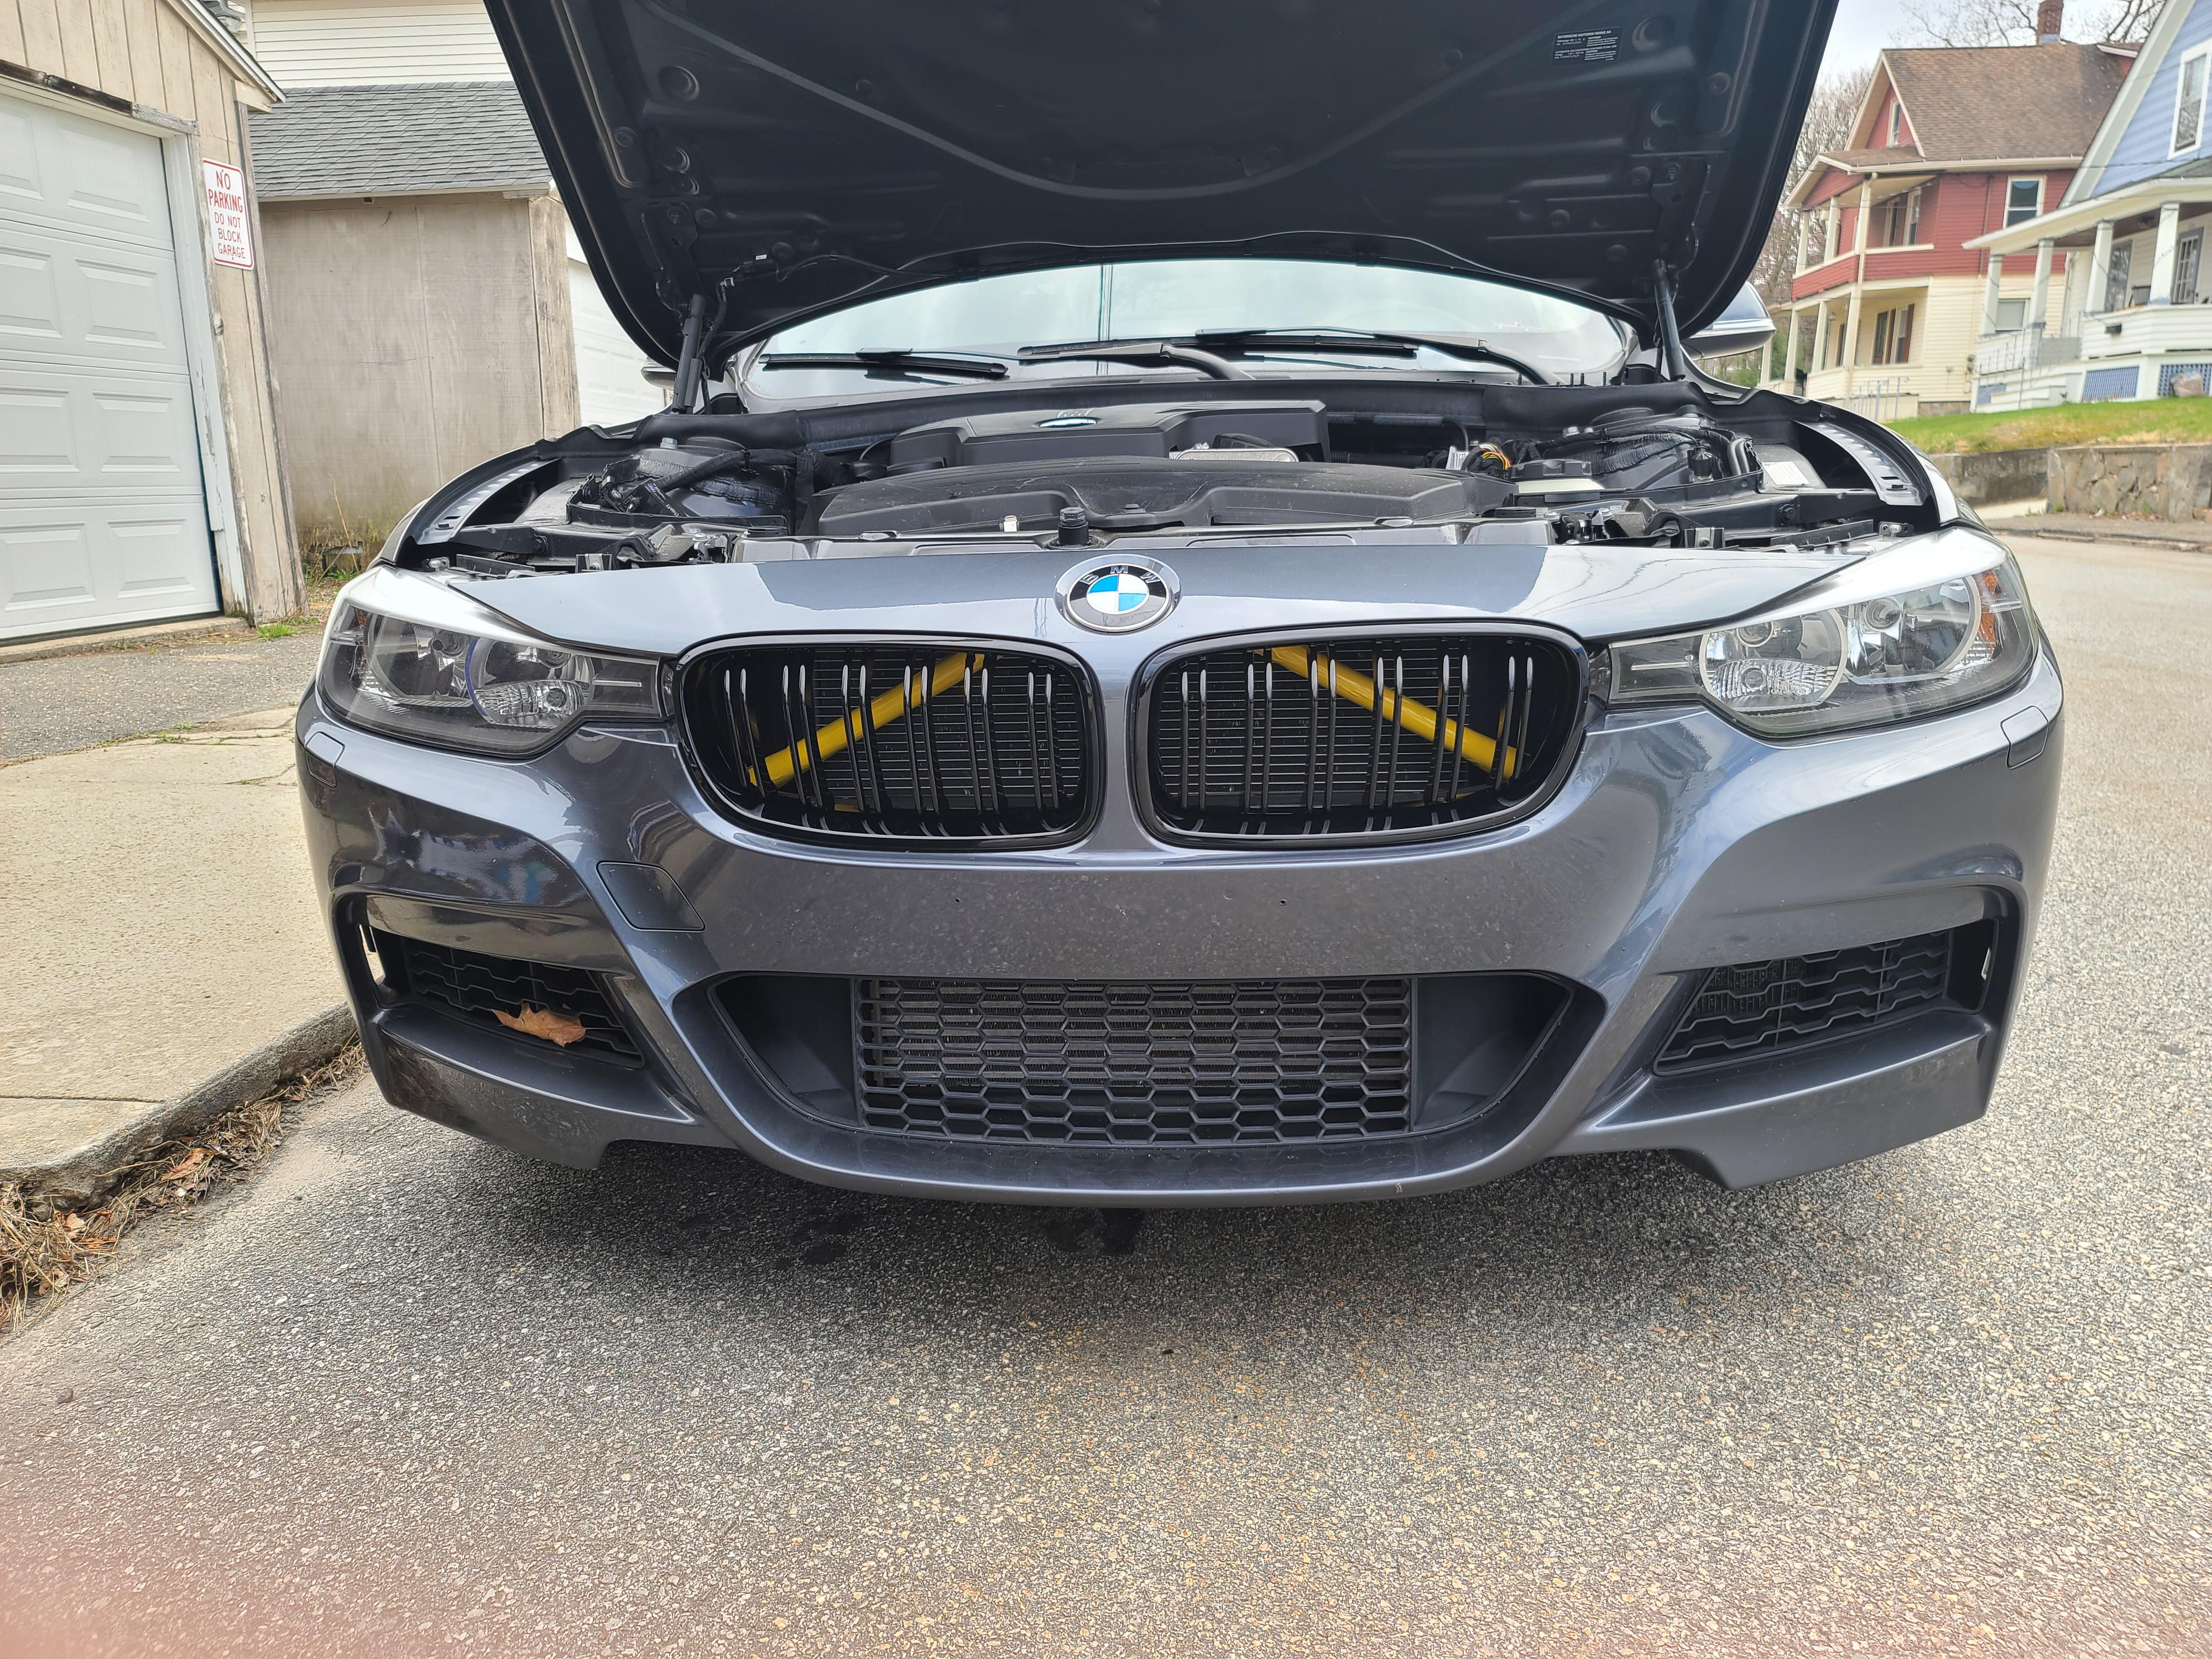 Exon Front Grille V-Brace Trim Cover Yellow suits BMW F-Series 1 / 2 / 3 / 4 Series (F20 / F22 / F30 / F32) Z4 (G29) - MODE Auto Concepts